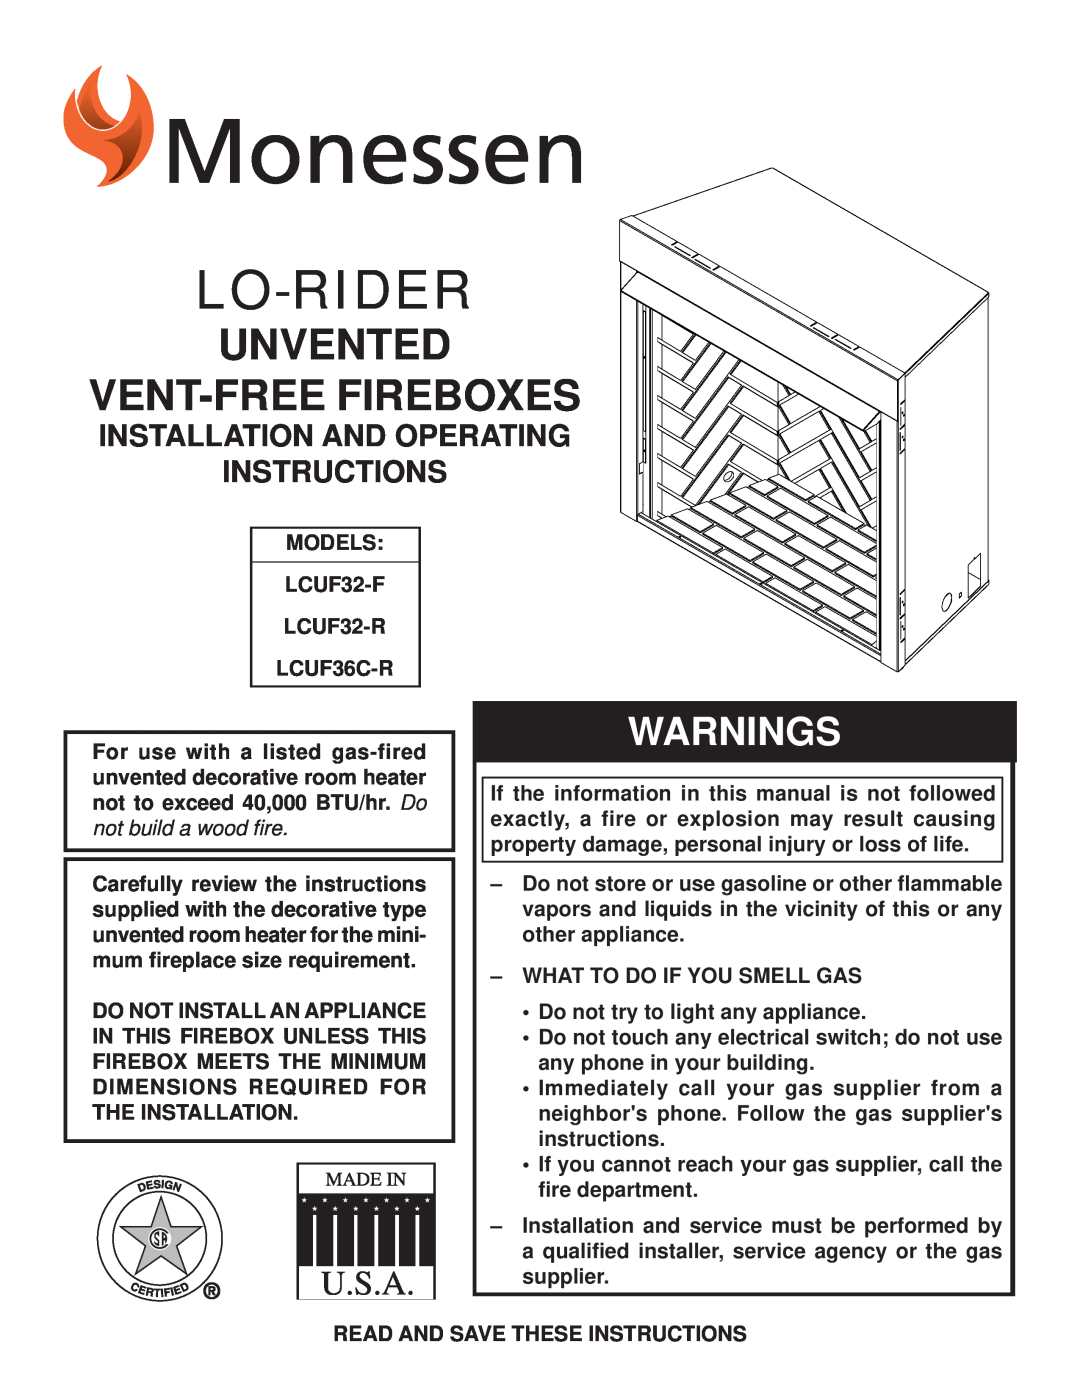 Monessen Hearth LCUF32-F dimensions Lo-Rider, Unvented Vent-Freefireboxes, Warnings 